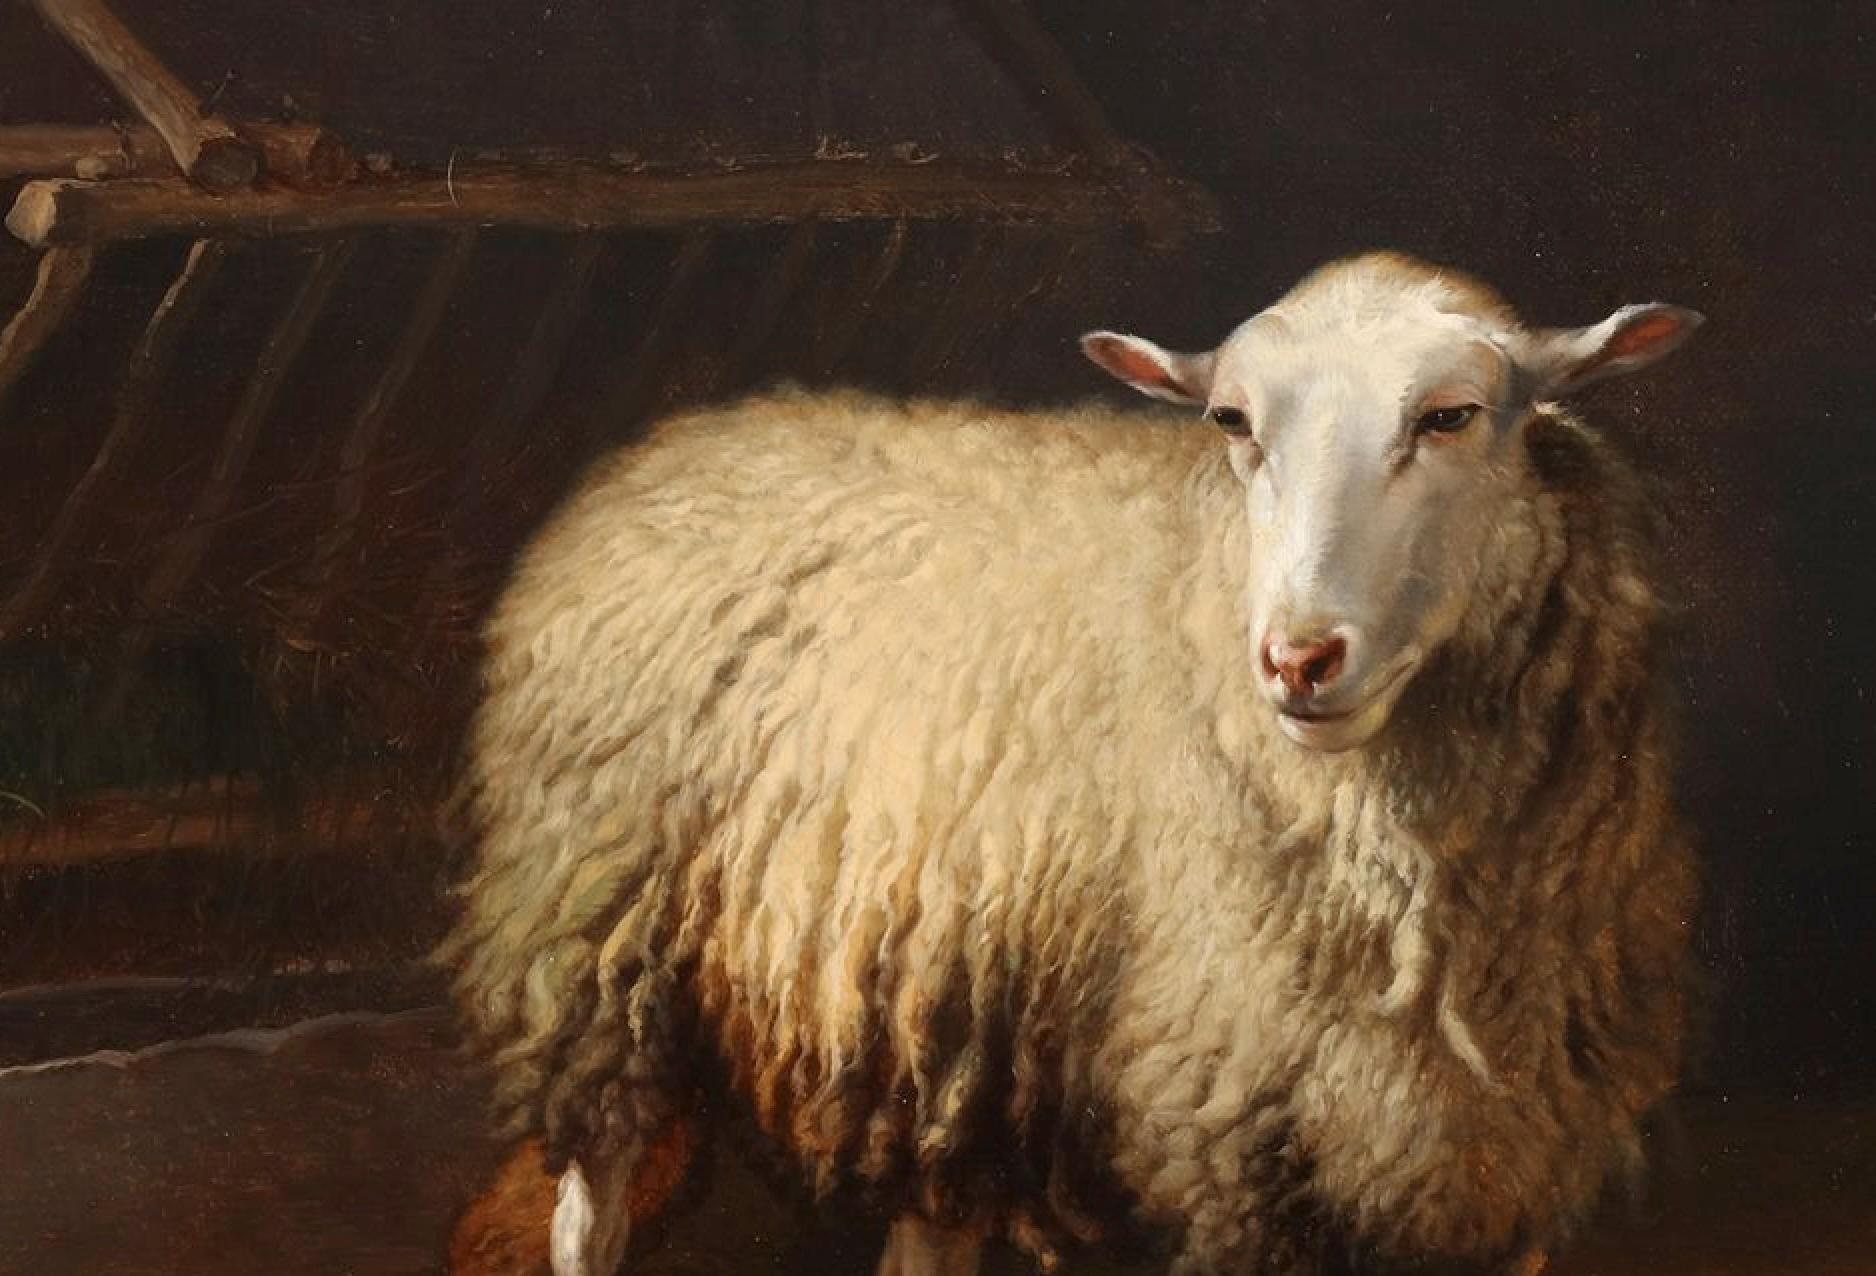 Oil on canvas

Signed and dated left center: “1859” also signed on the back.

Discover the serene beauty and meticulous craftsmanship of Eugène Verboeckhoven in this luminous painting depicting a mother sheep with her two lambs in a stable,